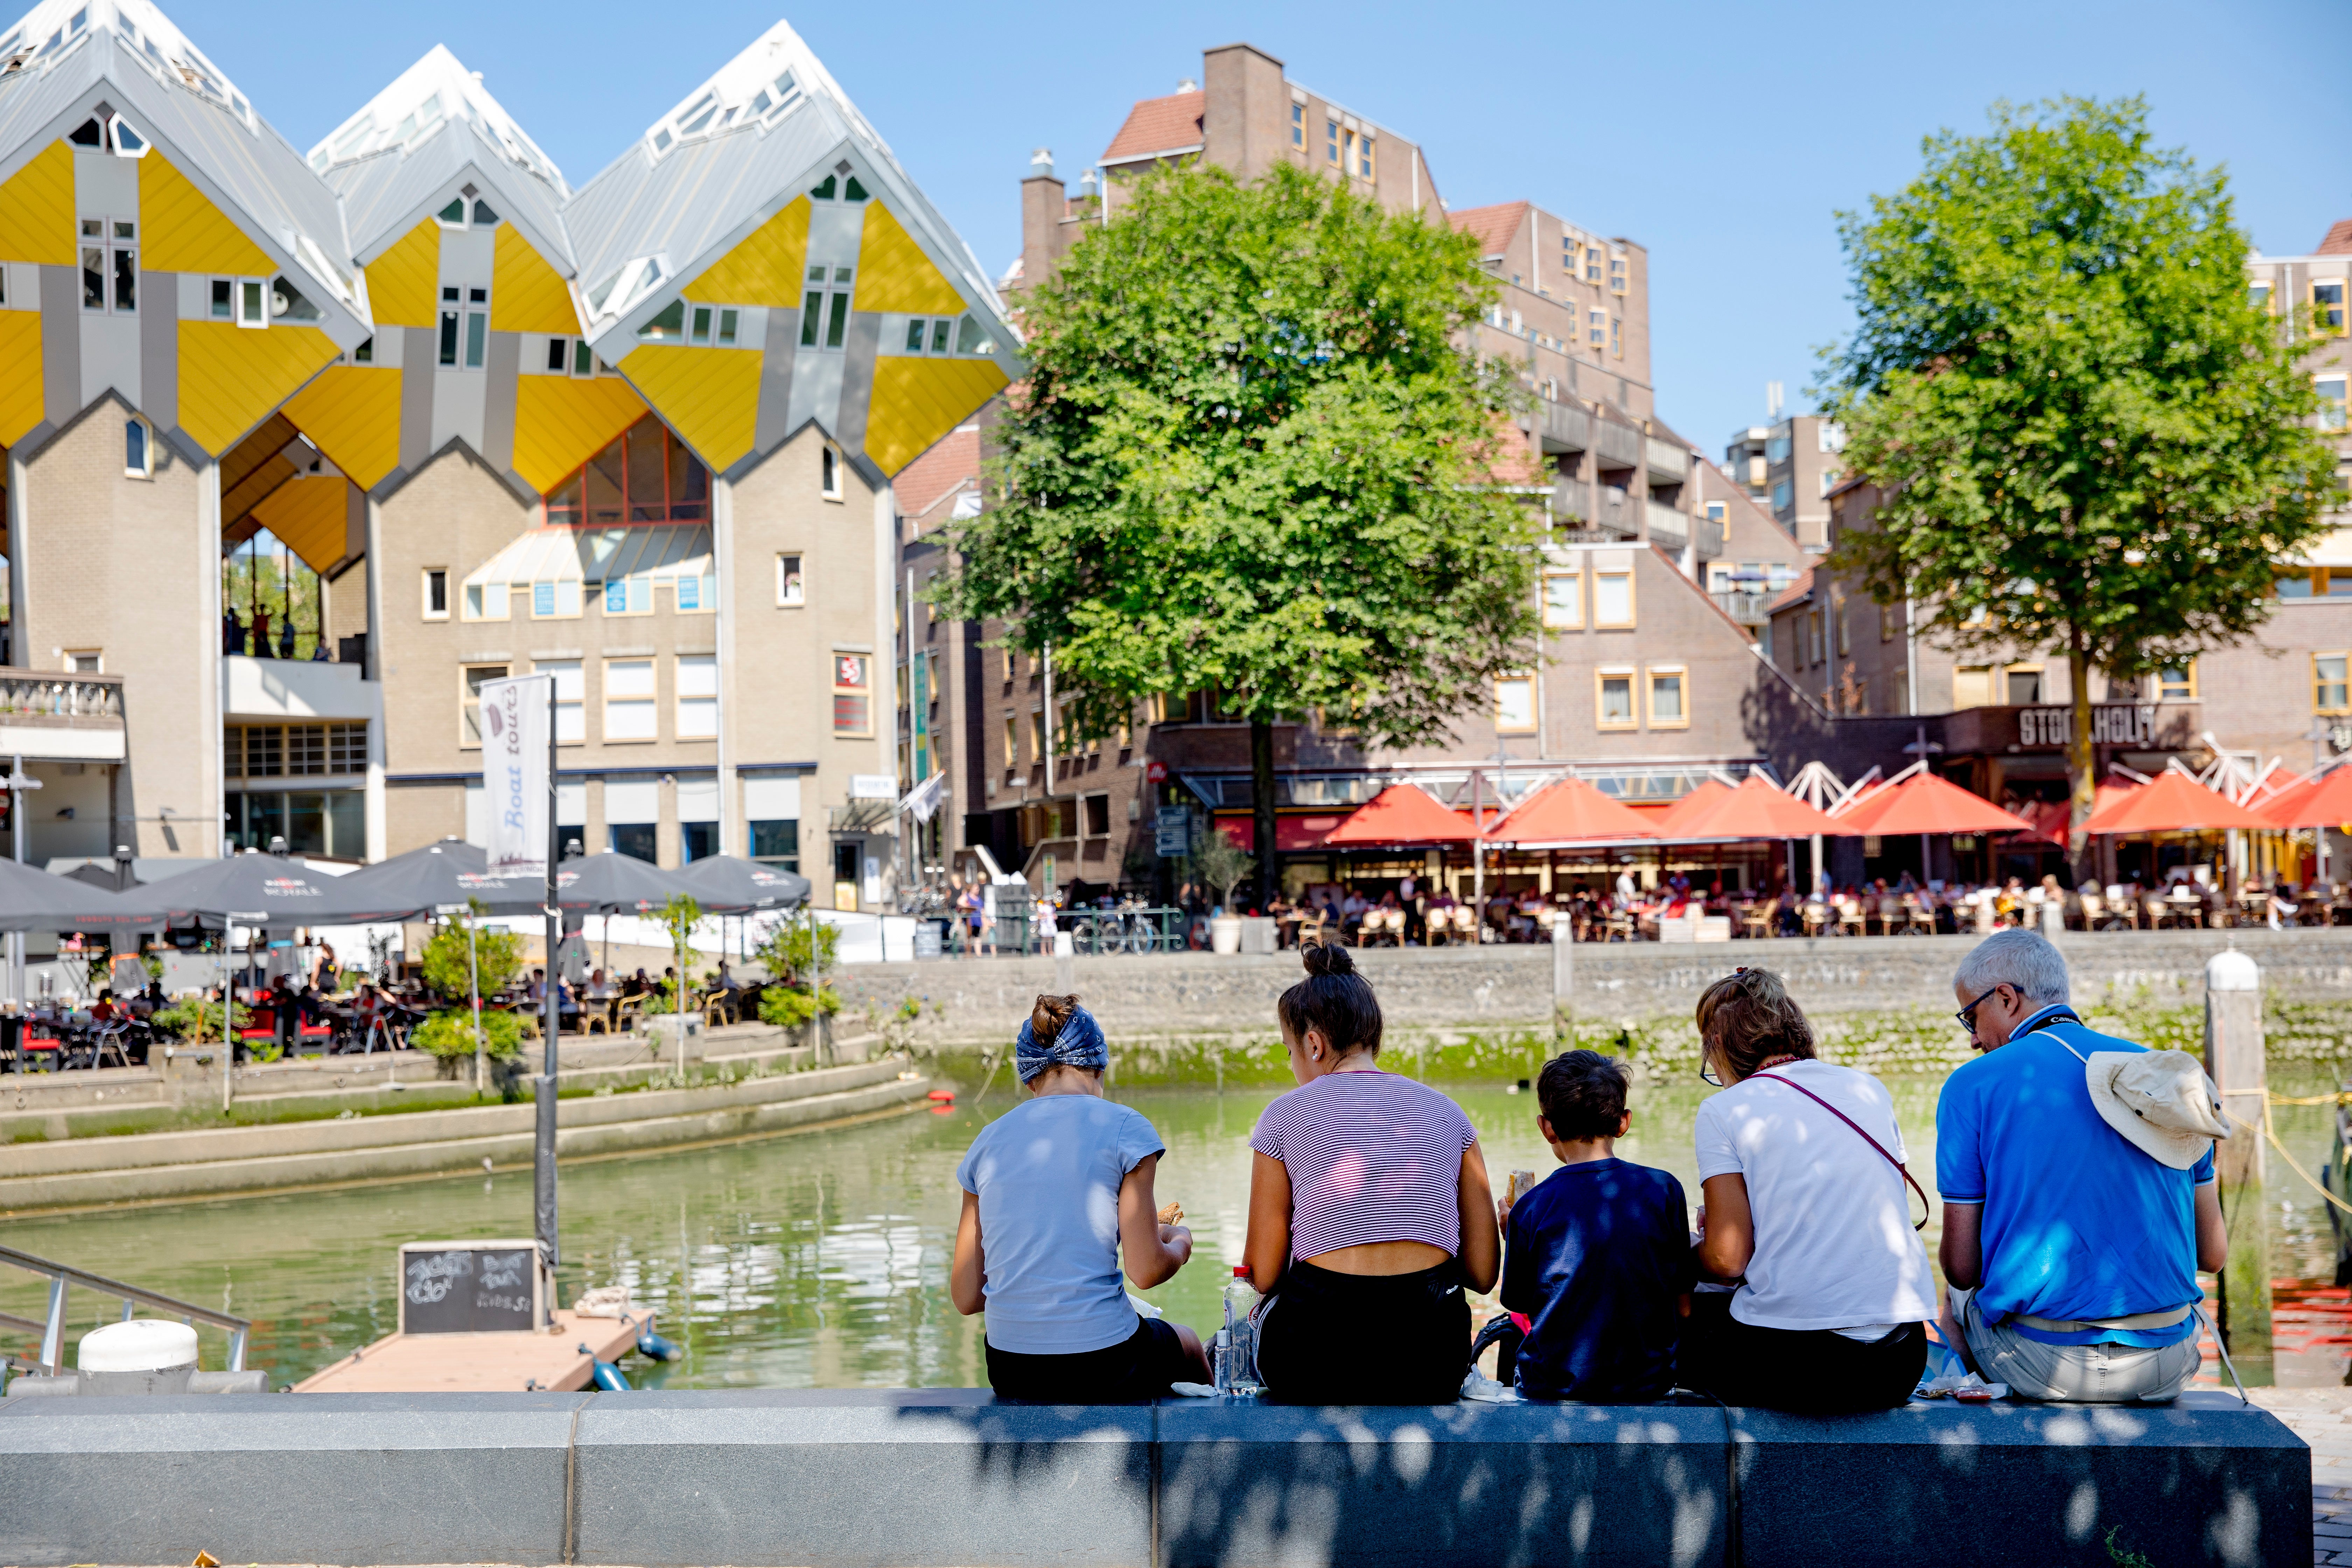 Rotterdam’s yellow cube houses have gained acclaim from architecture fans